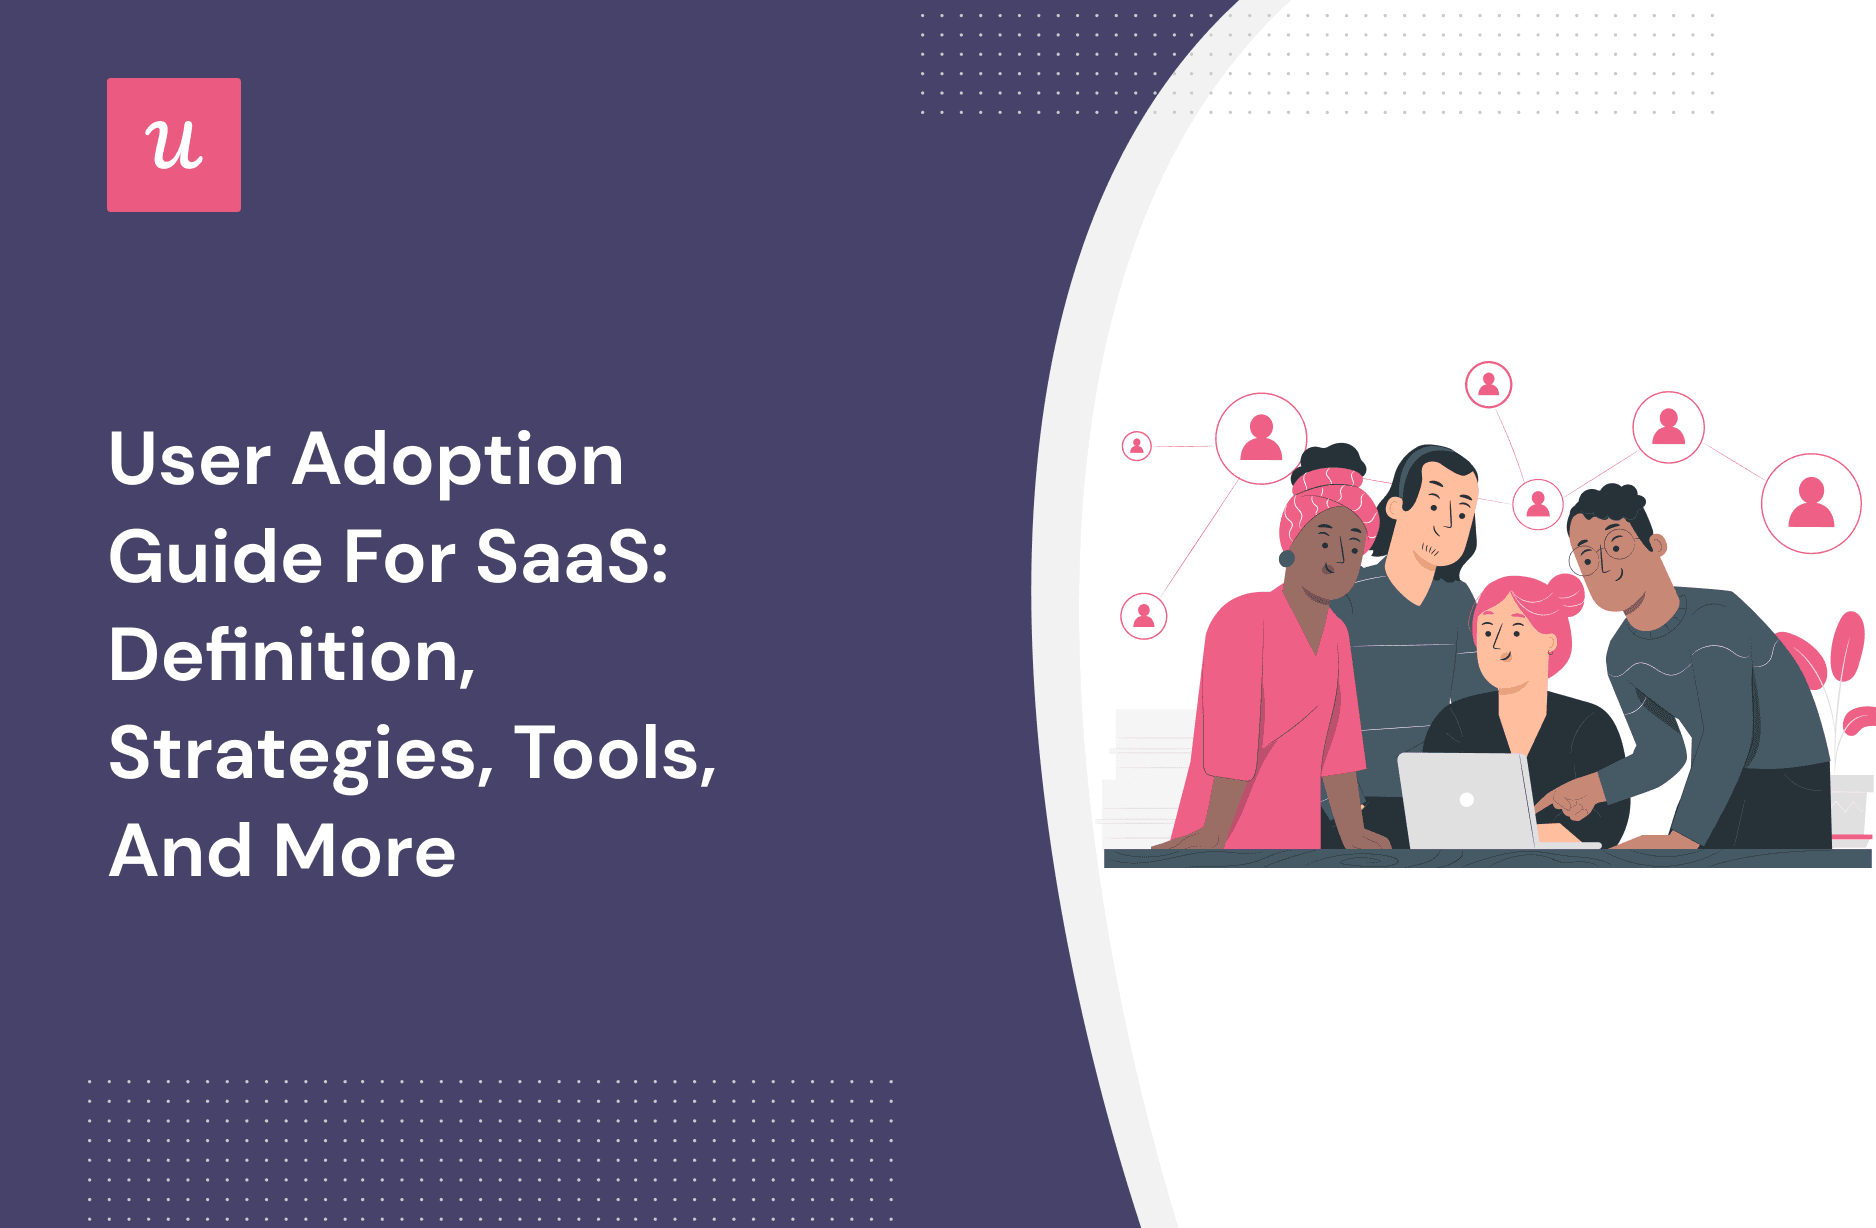 User Adoption in SaaS: Definition, Strategies, Tools, and More cover